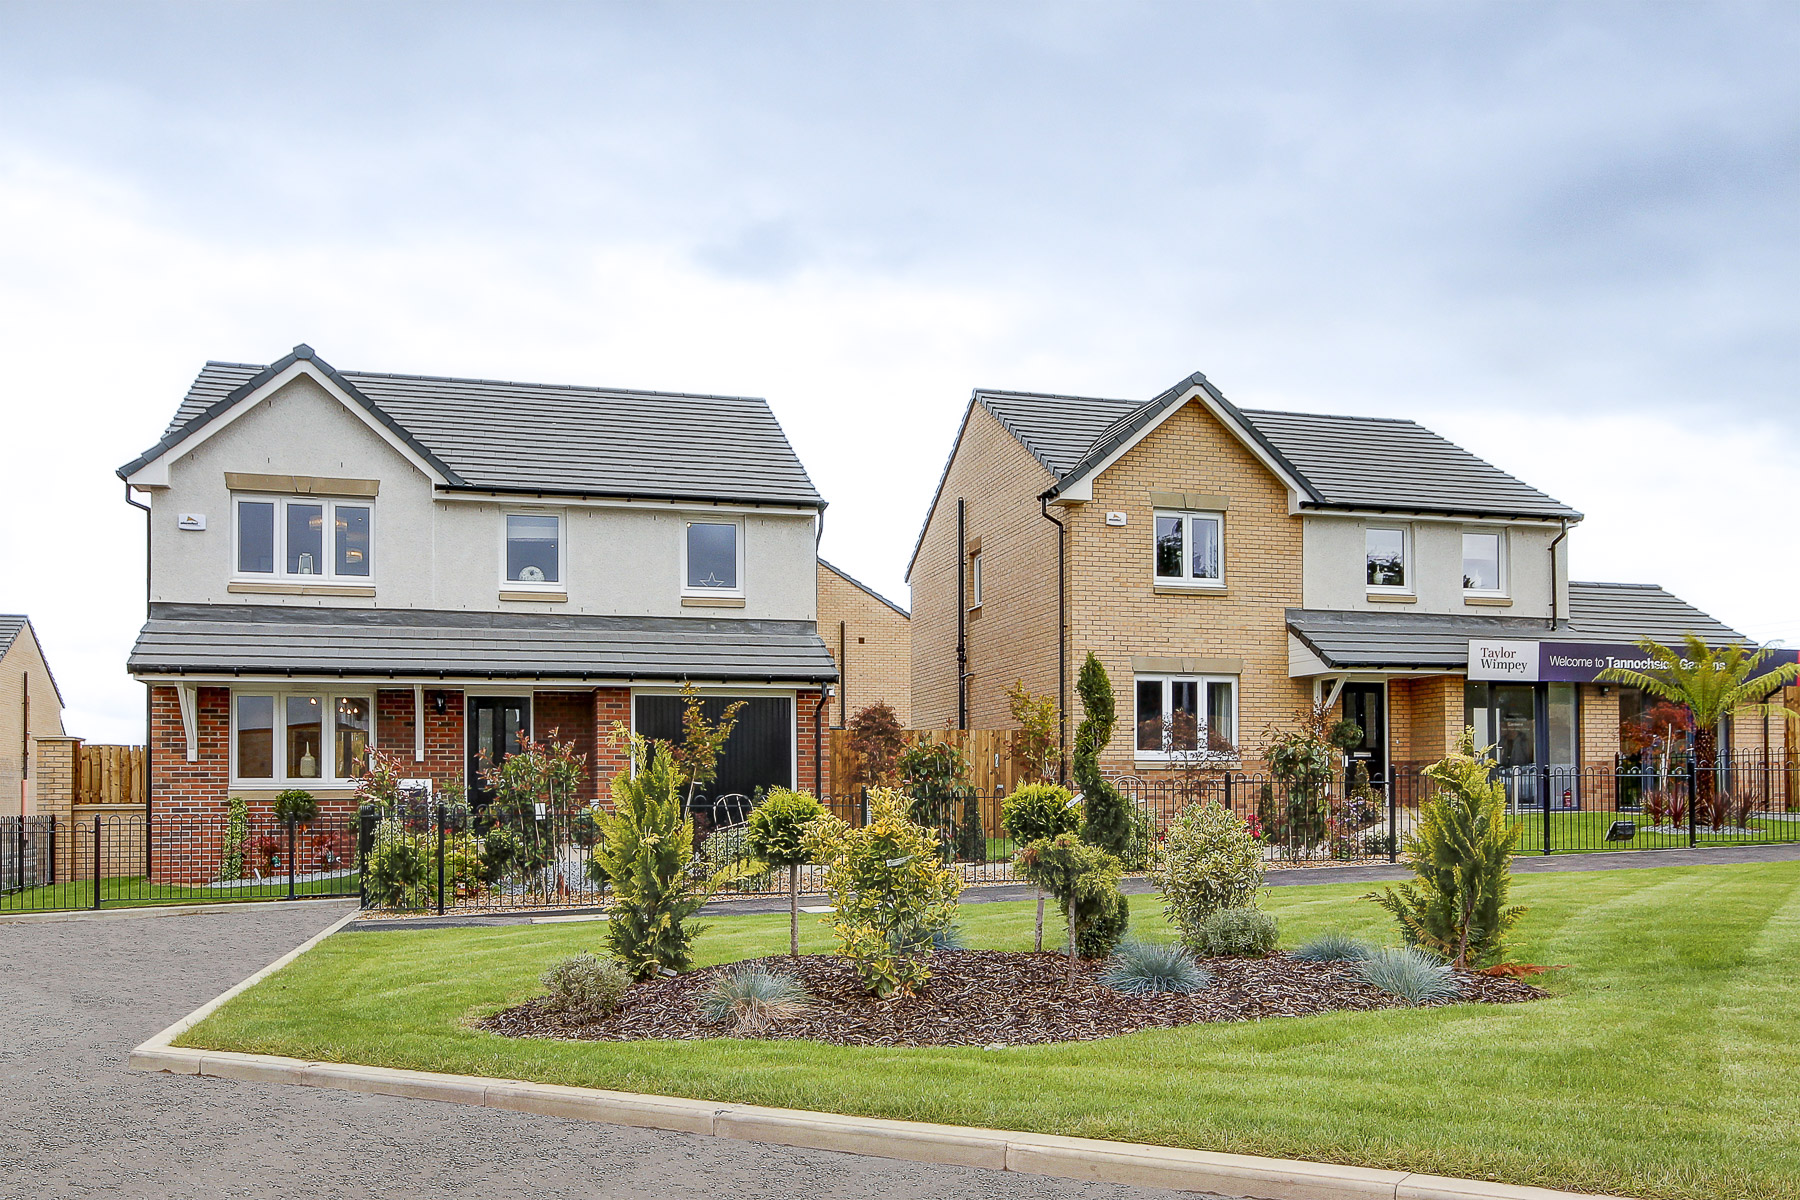 Taylor Wimpey makes detailed planning application for Carnbroe development